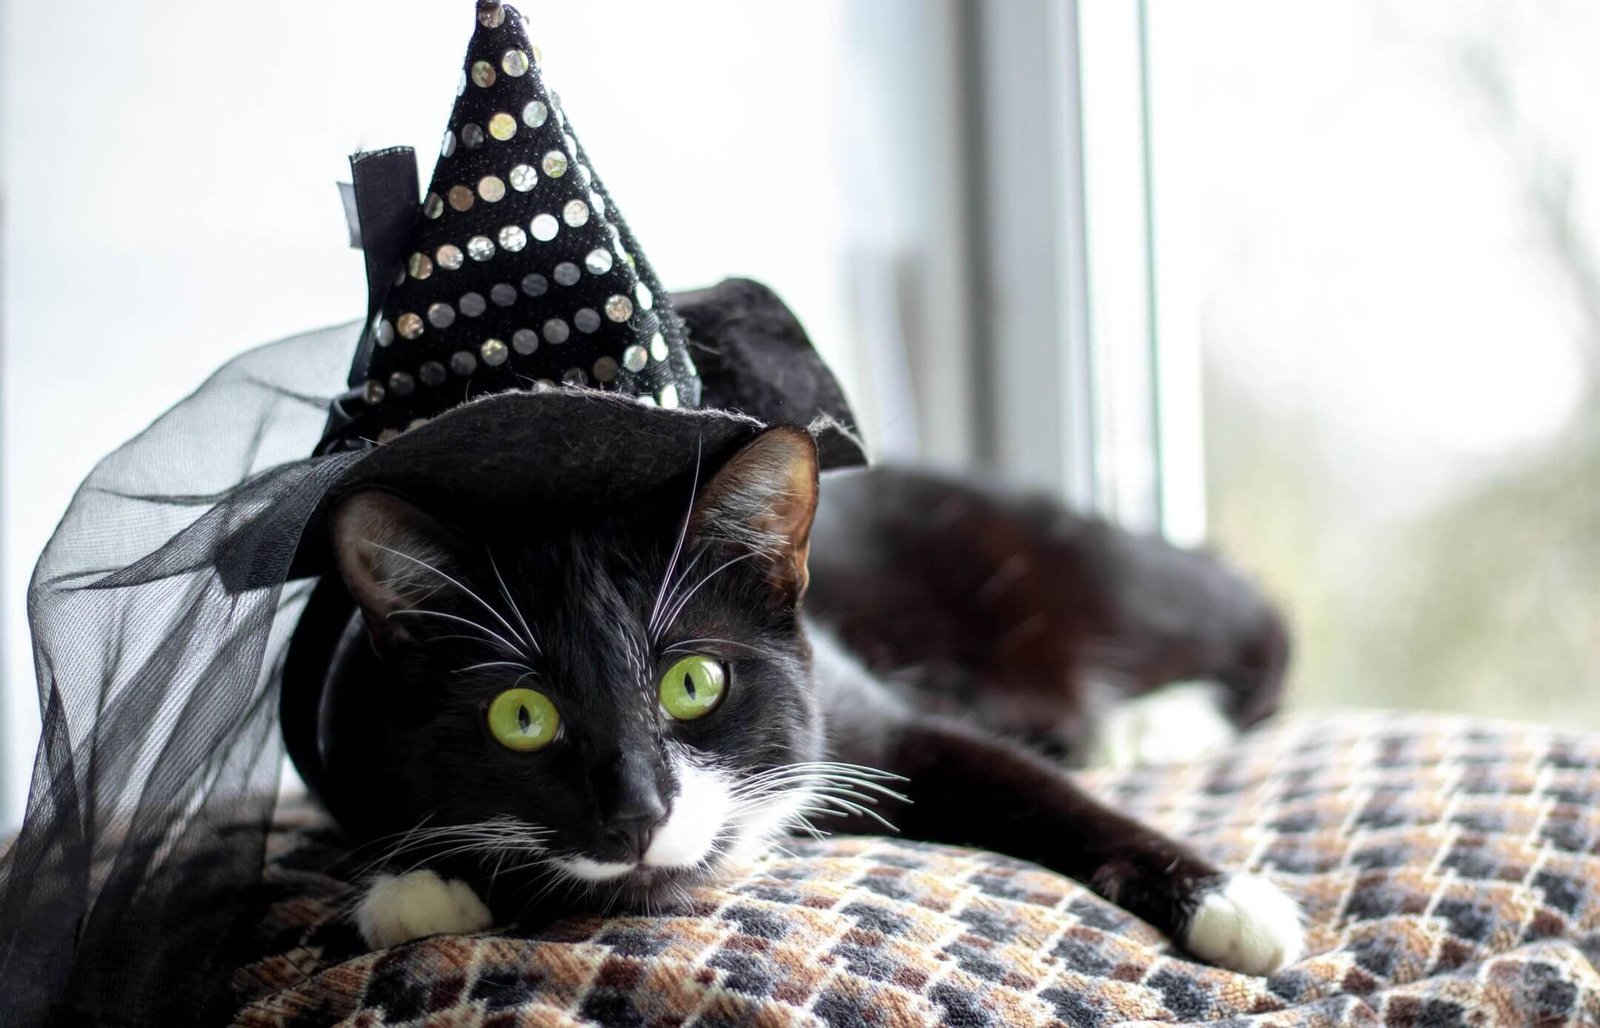 Choosing the Perfect Halloween Costume for Your Cat